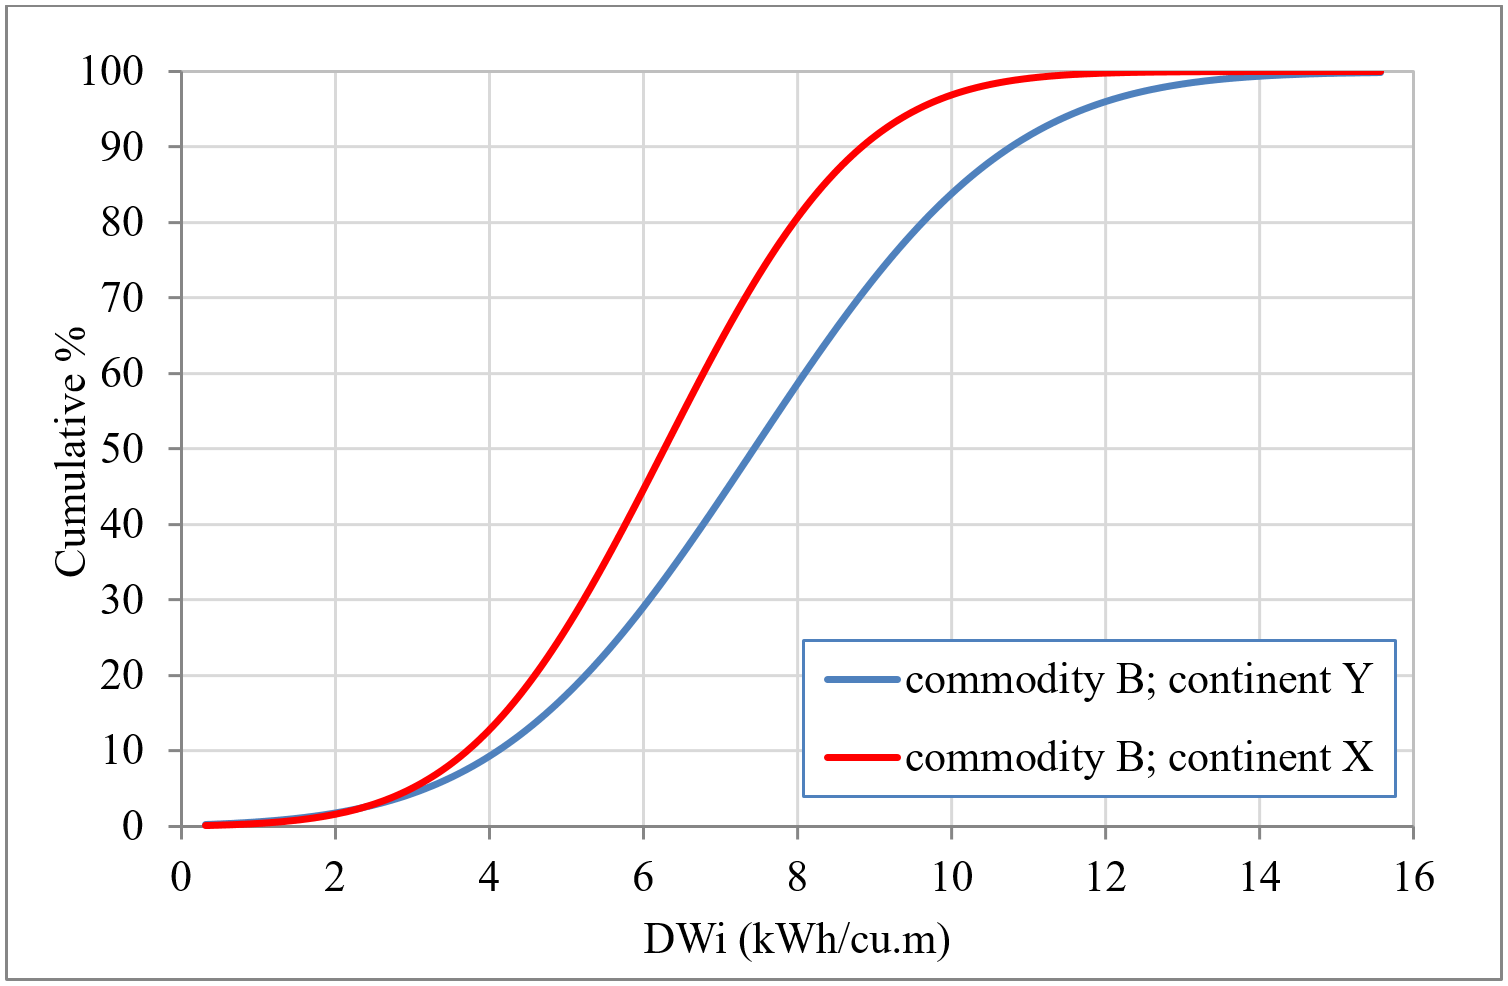 figure 2 - Cumulative Distributions of the DWi Parameter of a Particular Commodity vs Continent